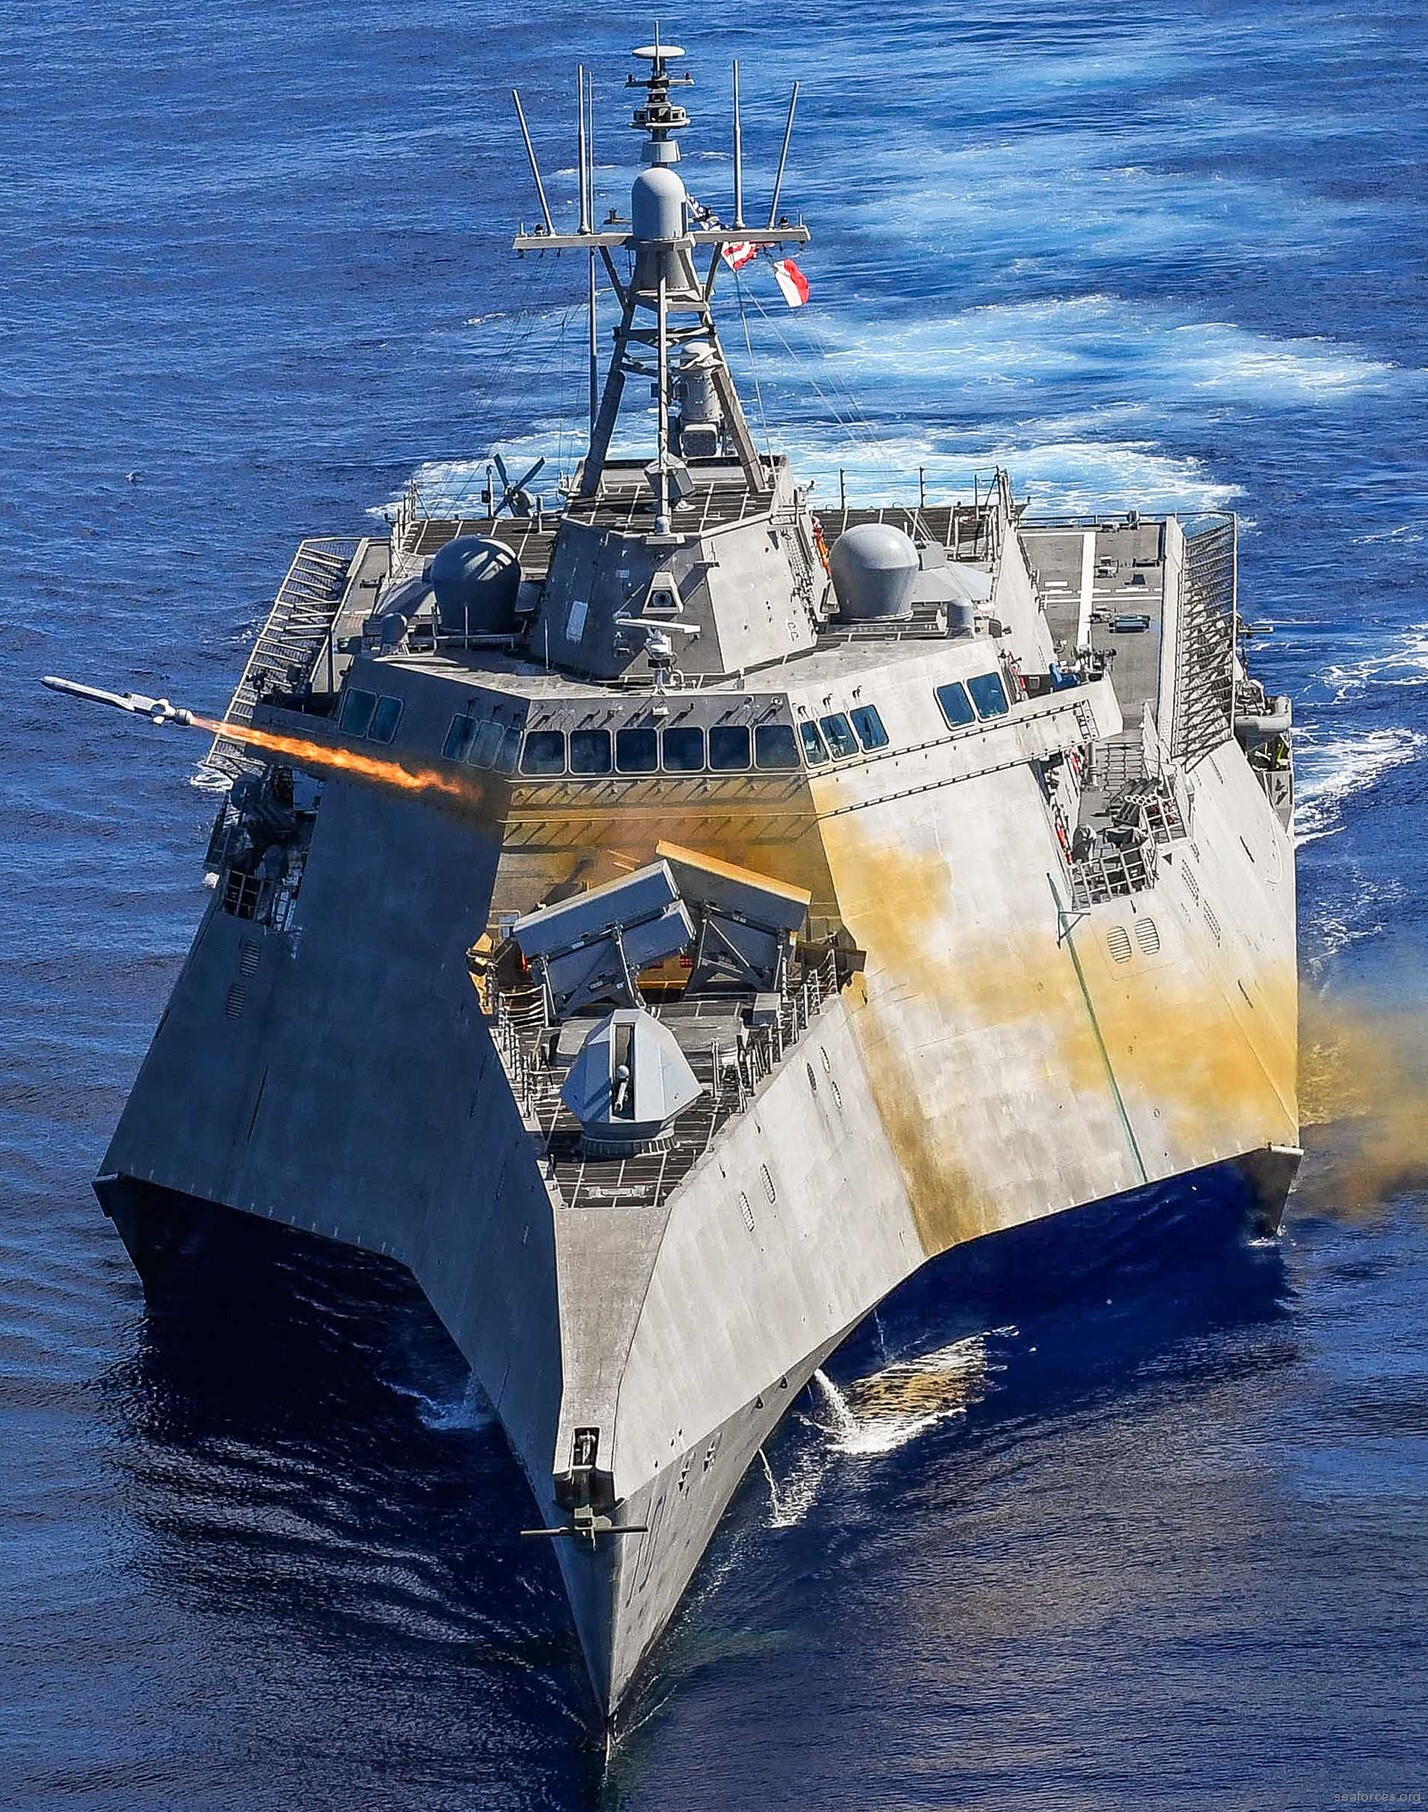 lcs-10 uss gabrielle giffords littoral combat ship independence class us navy 17 naval strike missile nsm jsm live fire exercise